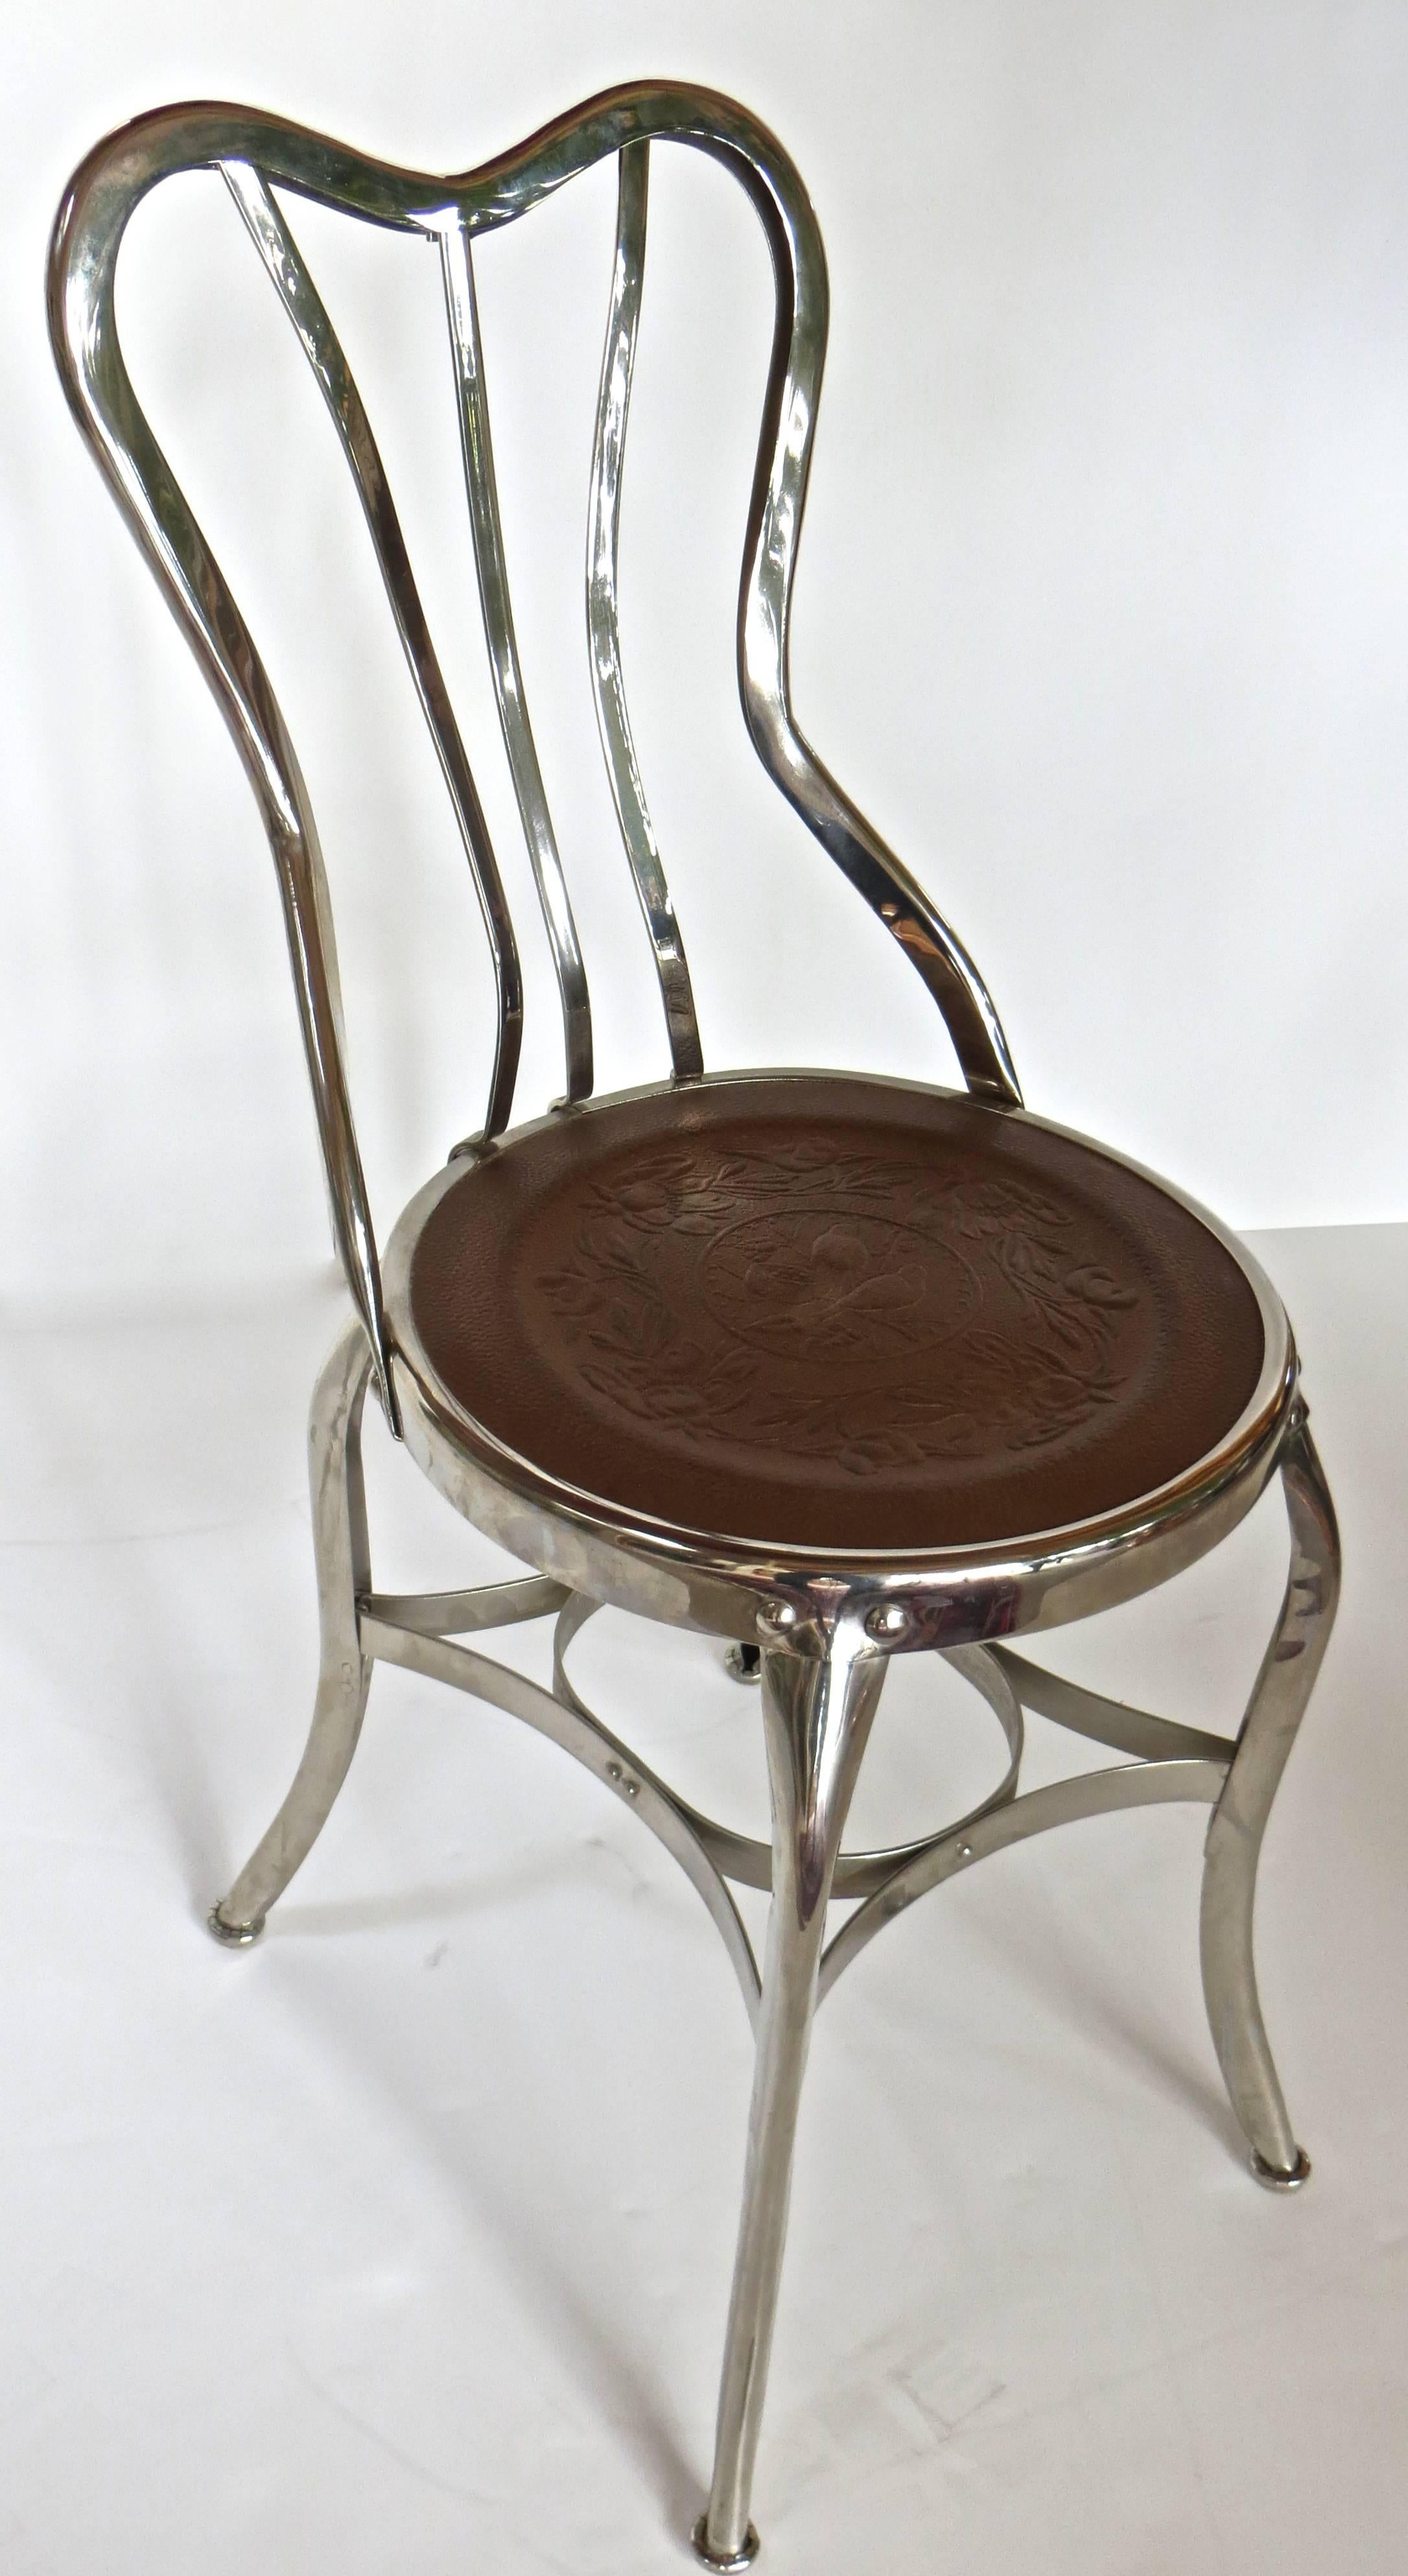 American three-piece ice cream parlor suite, consisting of a table and two chairs. The table has three steel metal legs ending in an iron ball and claw foot, which supports a circular white marble top, mounted on a 1